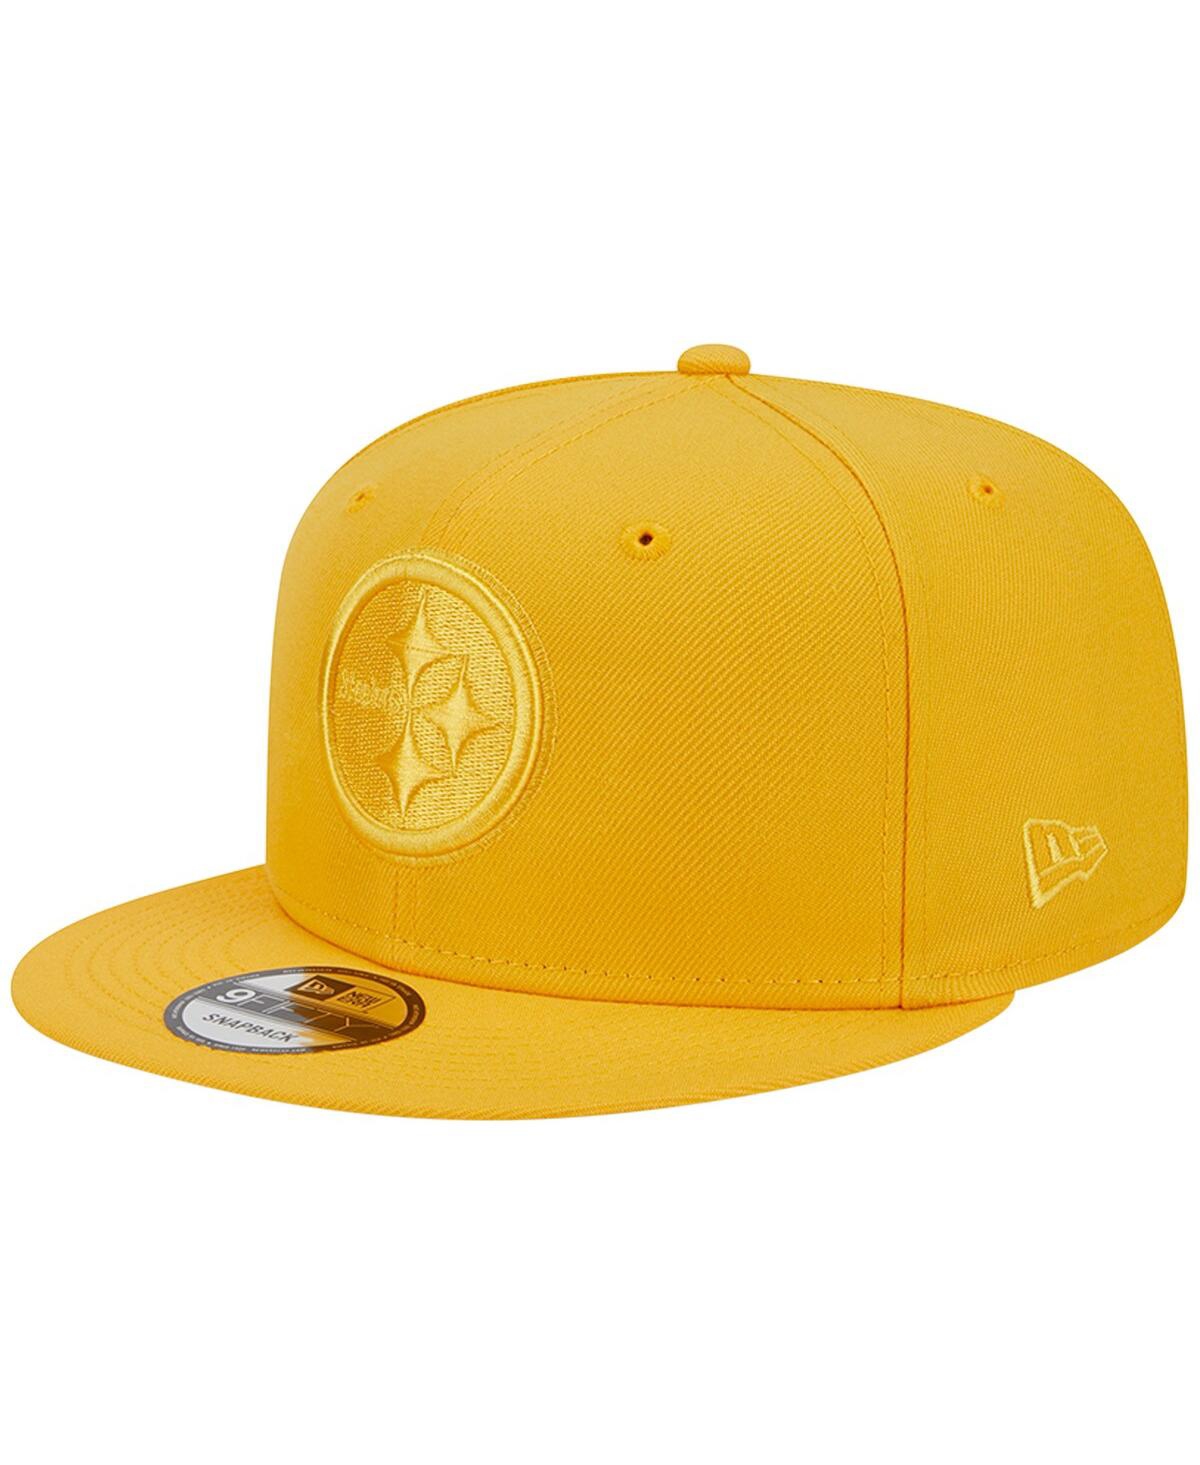 NEW ERA MEN'S NEW ERA GOLD PITTSBURGH STEELERS COLOR PACK 9FIFTY SNAPBACK HAT